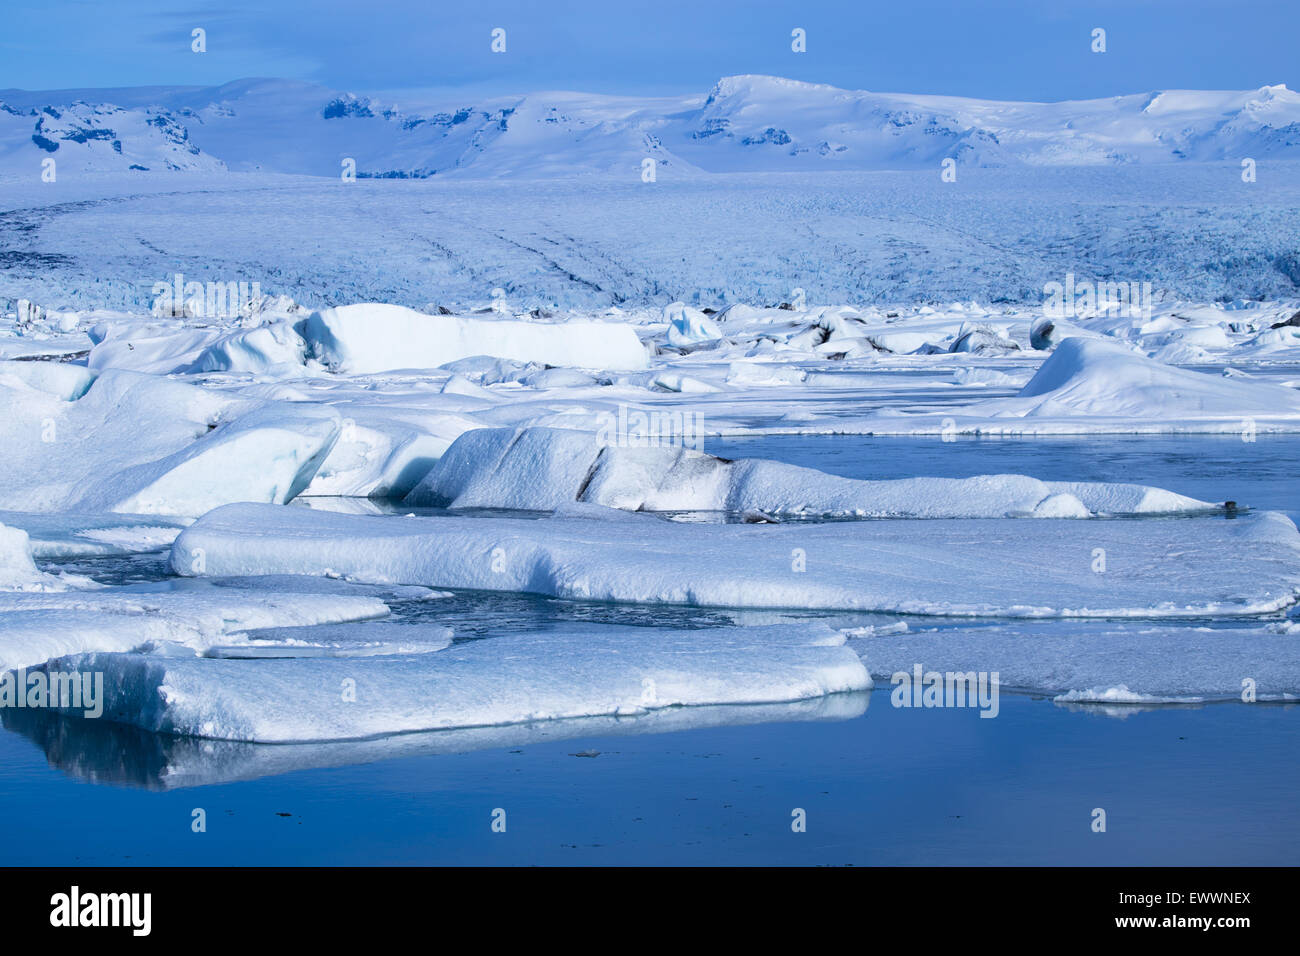 Ice bergs on the glacial lagoon in Iceland during winter Stock Photo